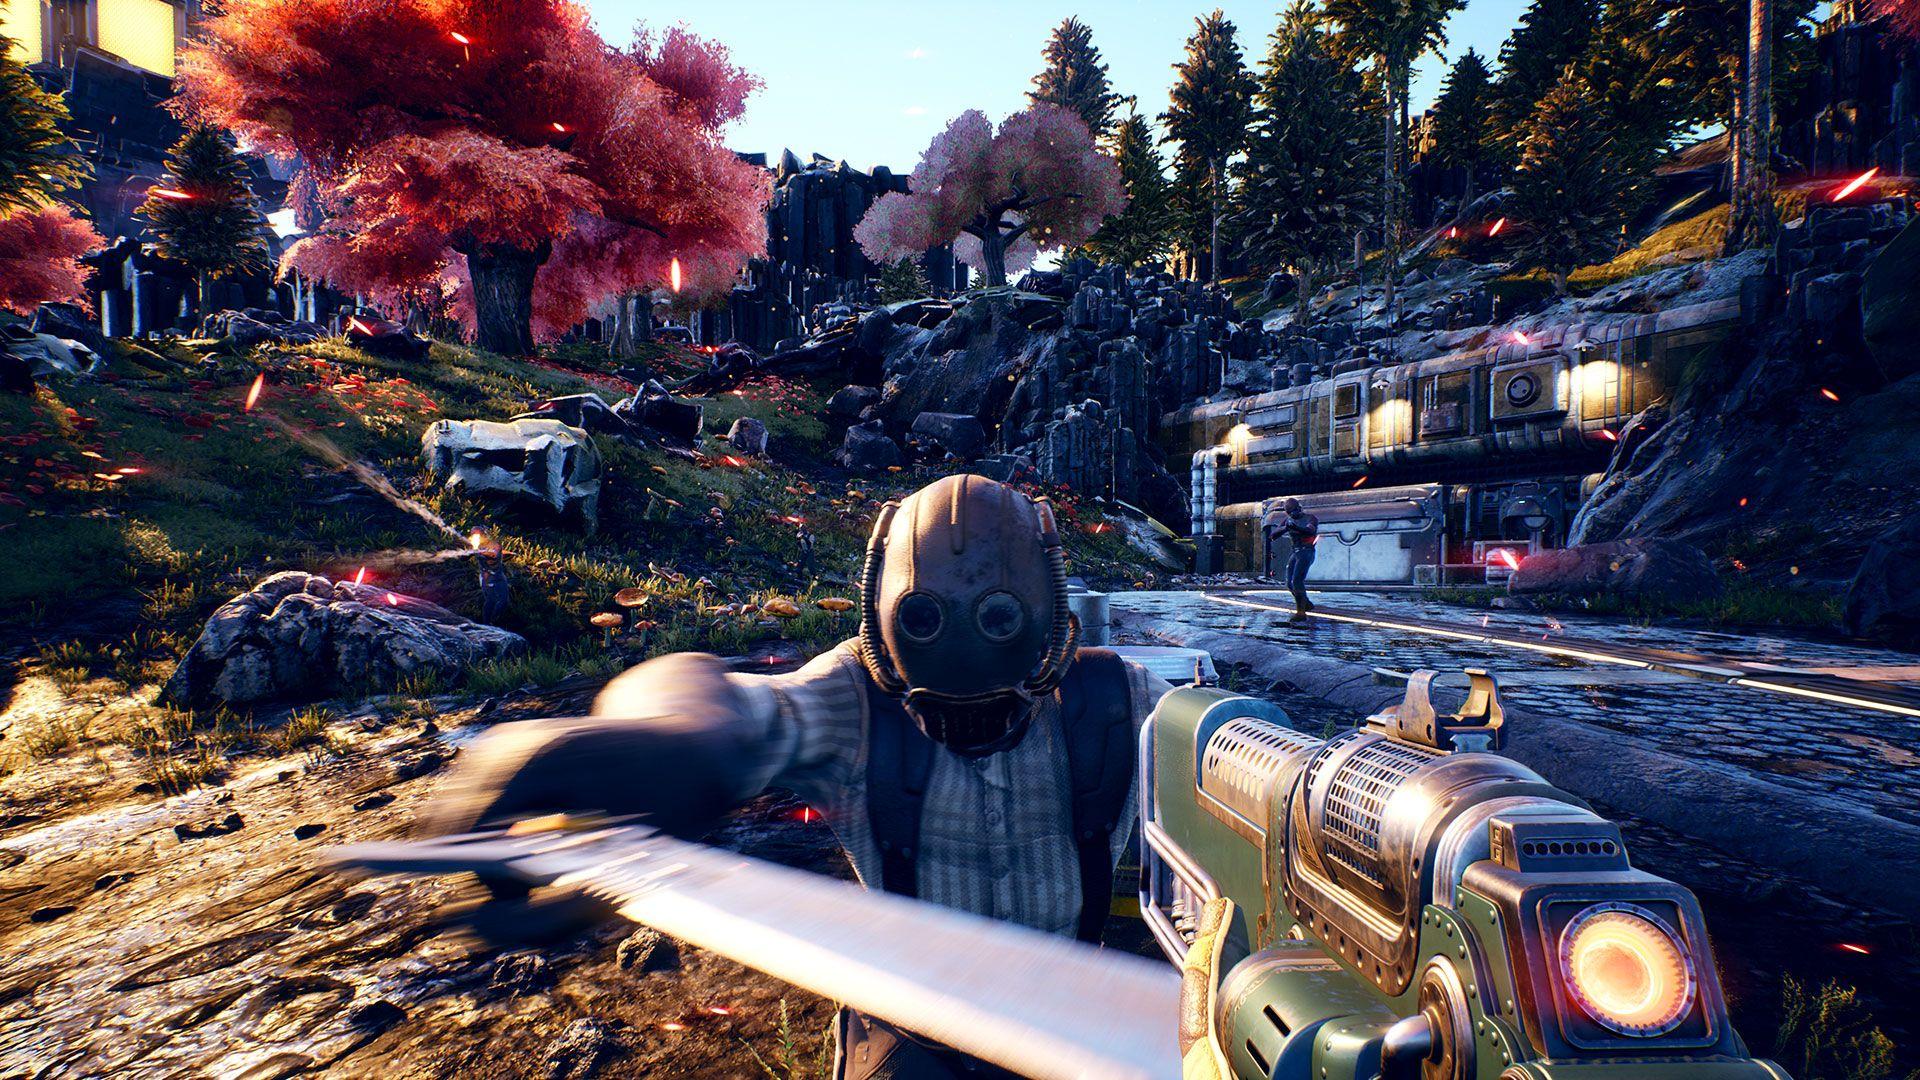 The Outer Worlds is the latest Obsidian RPG it looks rather